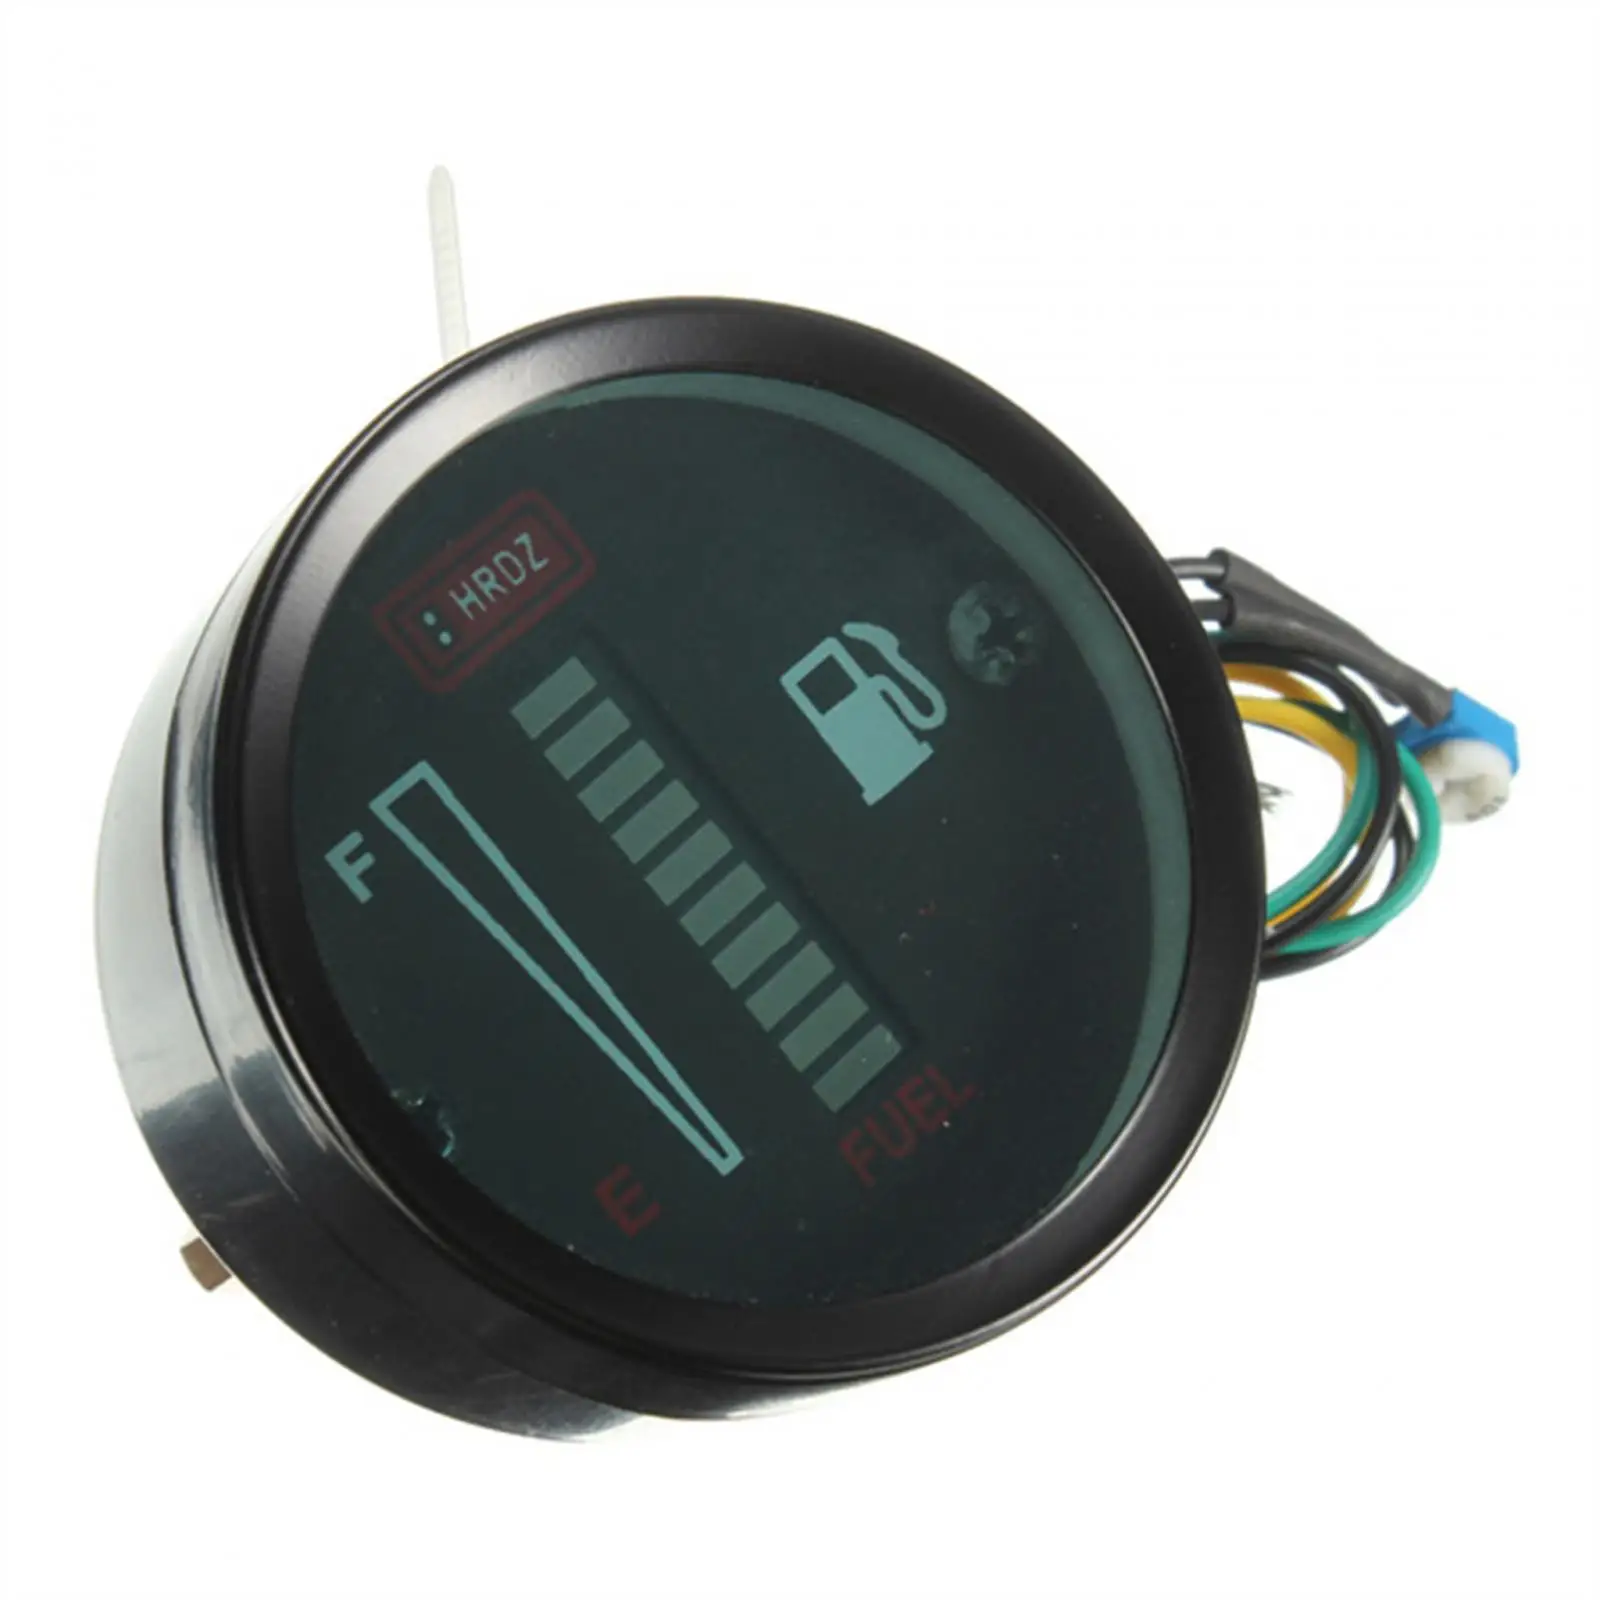 Car Motorcycle Fuel Level Meter Gauge Convenient Observation Vehicle SUV Replacement 1 Red LED Universal 12V 8 Blue LED Display